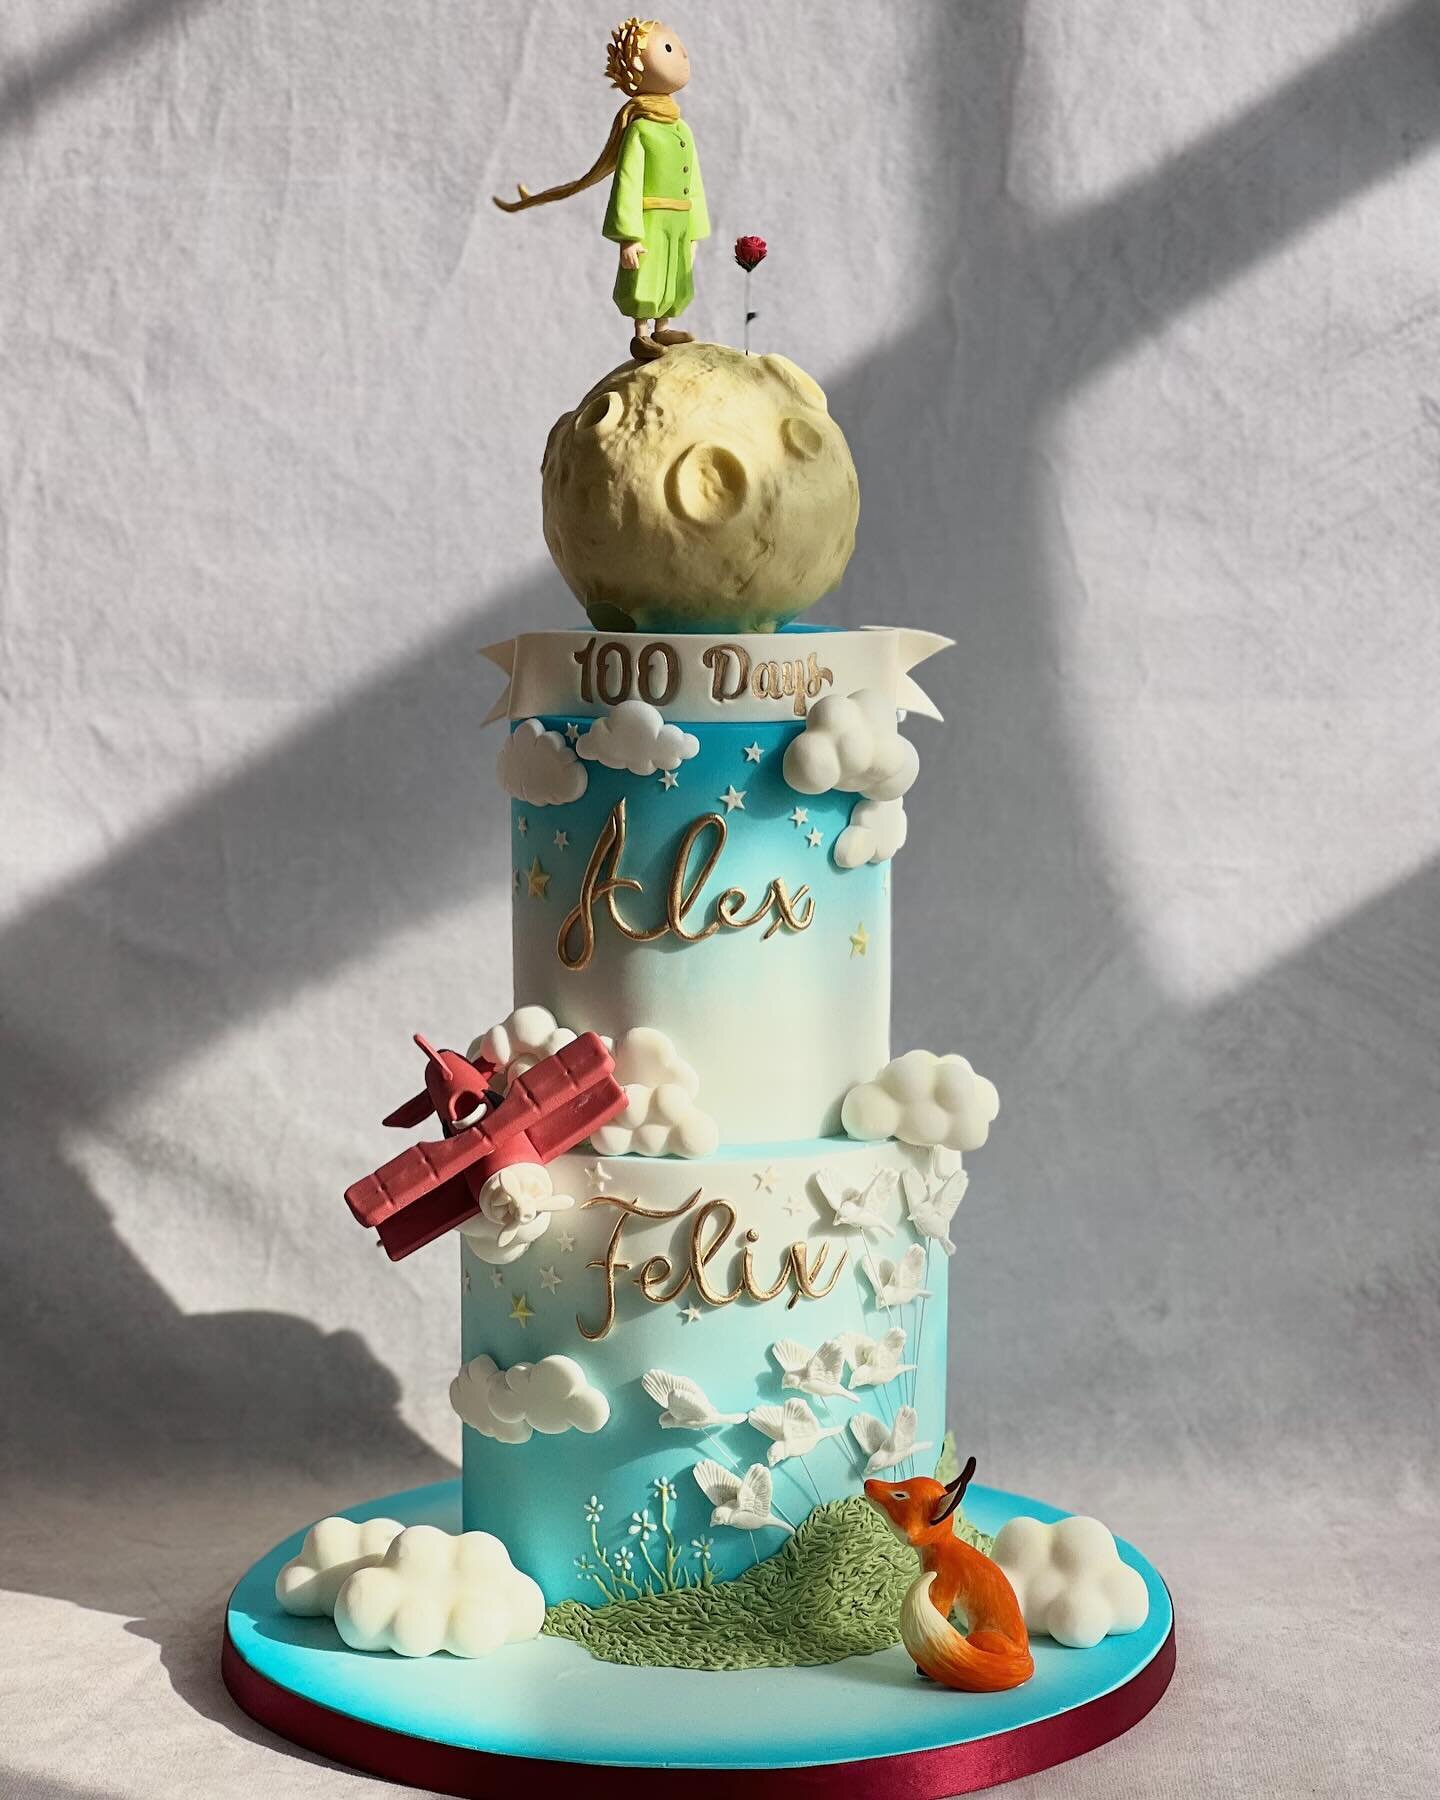 One from the archives today ☁️🩵🦊 

The Little Prince cake for two little ones. 

And that dramatic morning light is 👌👌.

.
#cake #cakeart #thelittleprince #thelittleprincecake #petitprince #childrenscake #birthdaycake #childrensbirthdaycake #luxu